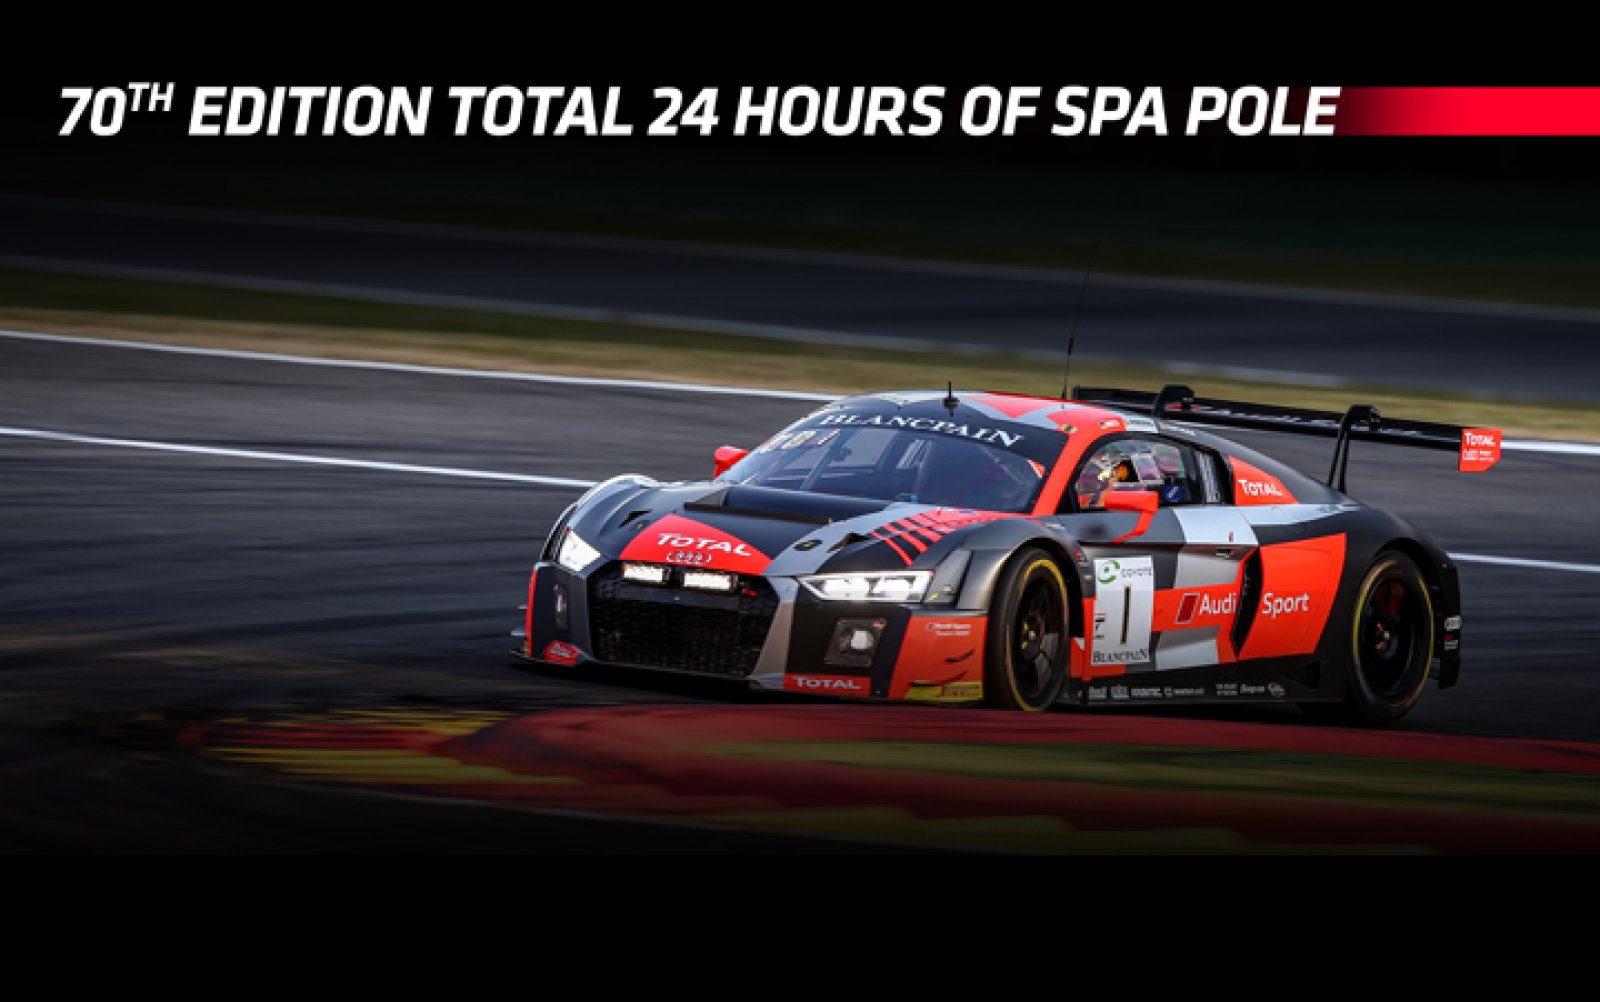 Audi Sport Team WRT takes dominant pole for 70th edition Total 24 Hours of Spa